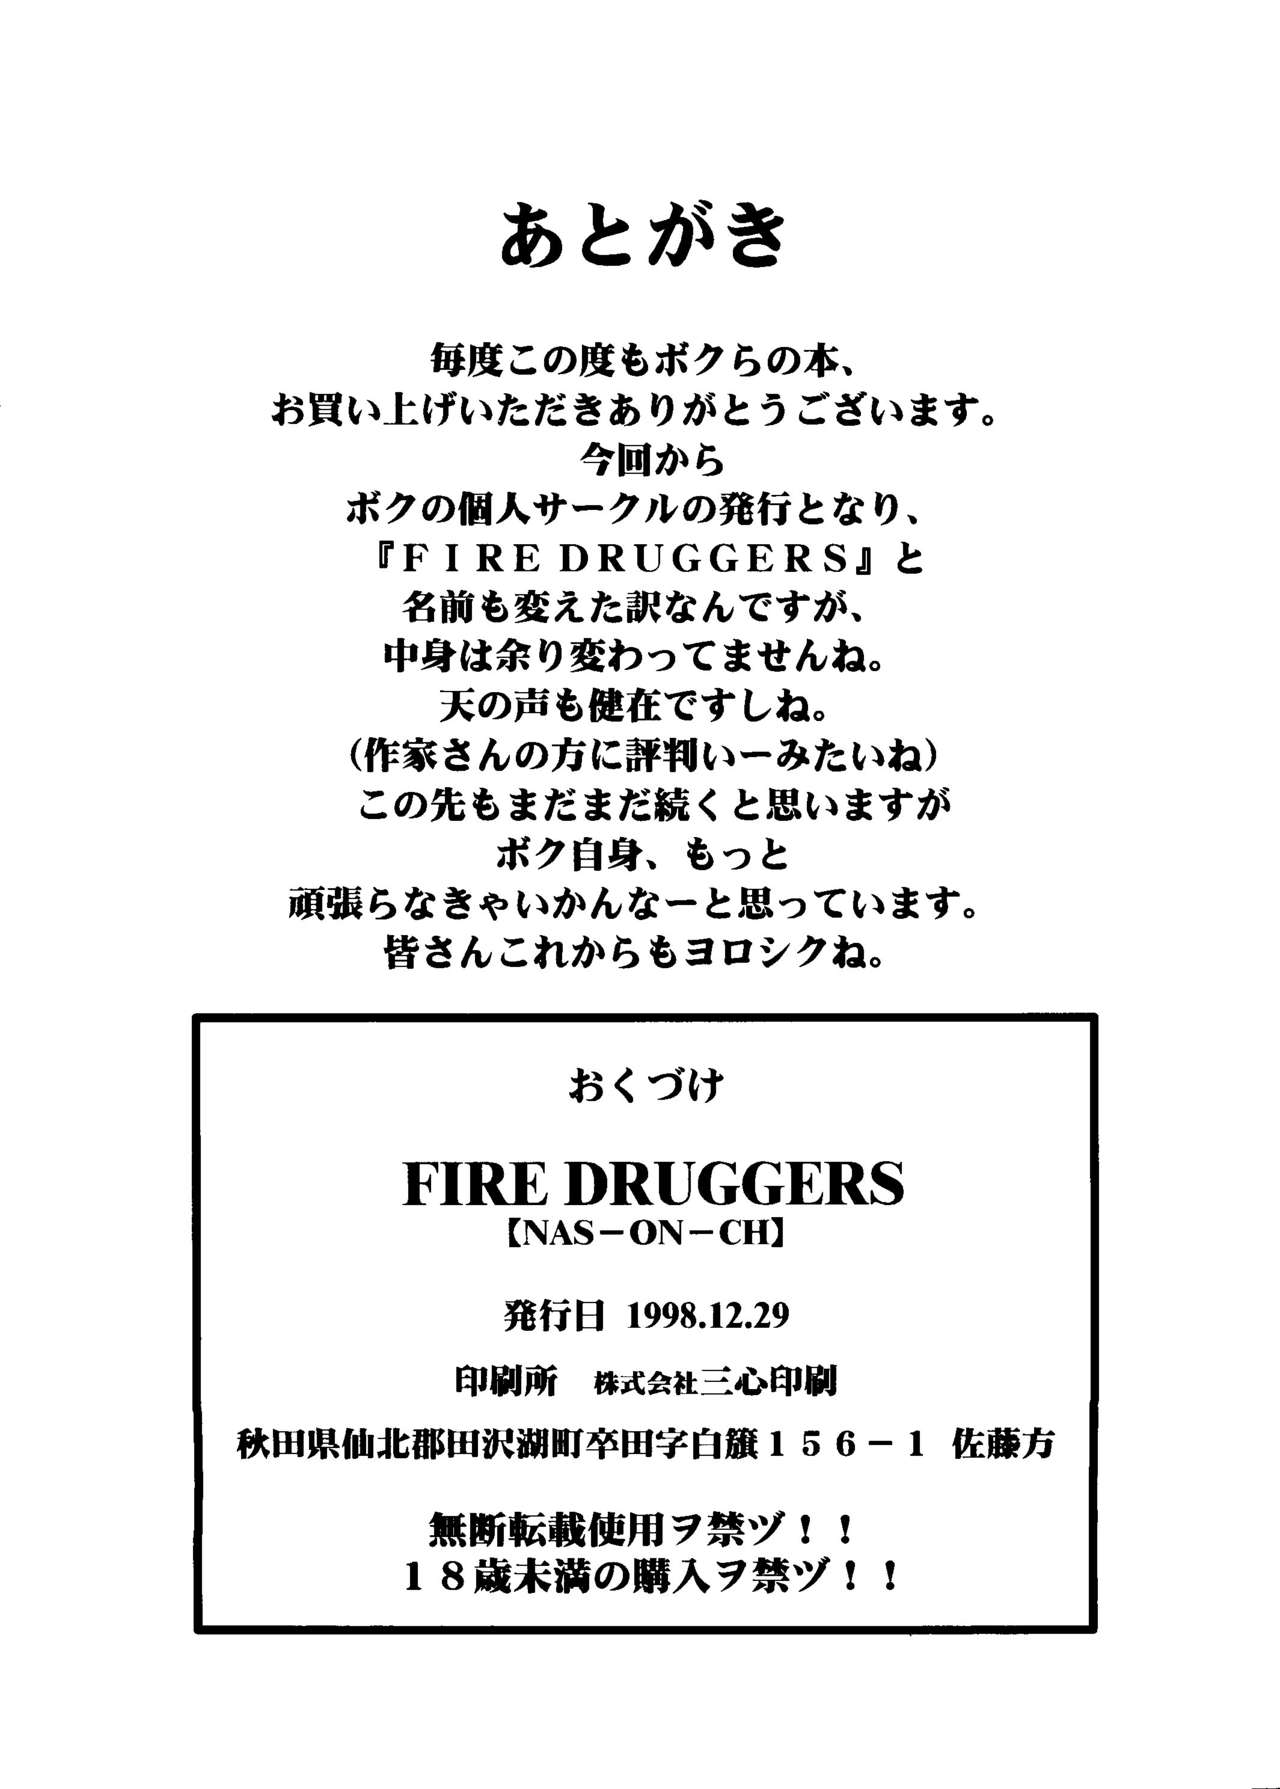 (C55) [NAS-ON-CH (Various)] Fire Druggers (Various) (C55) [NAS-ON-CH (よろず)] Fire Druggers (よろず)